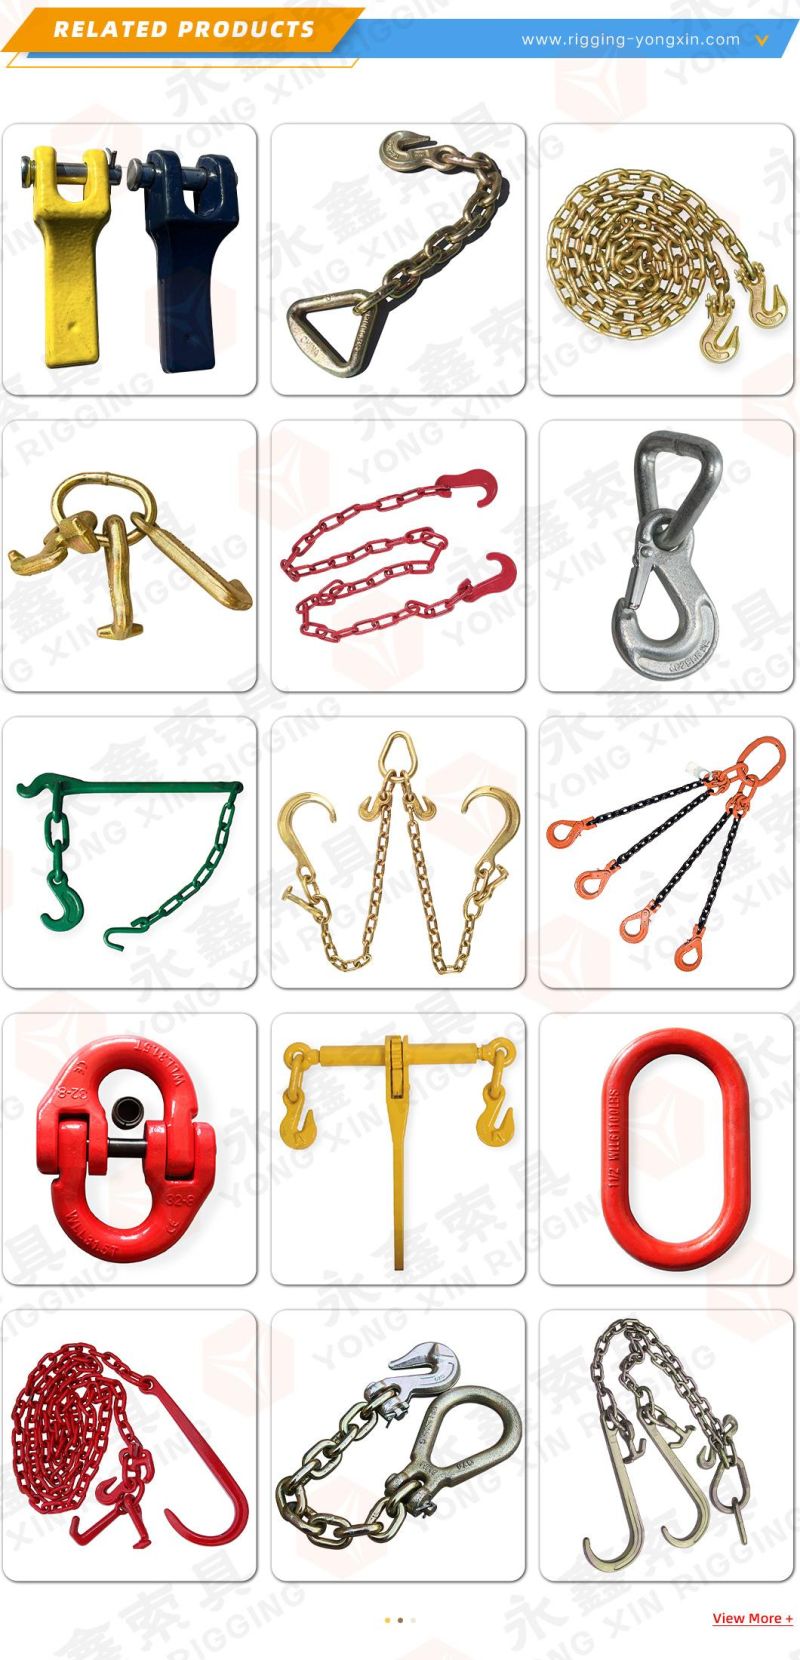 G70 5/16 X 20 Binder Chain with Clevis Grab Hooks